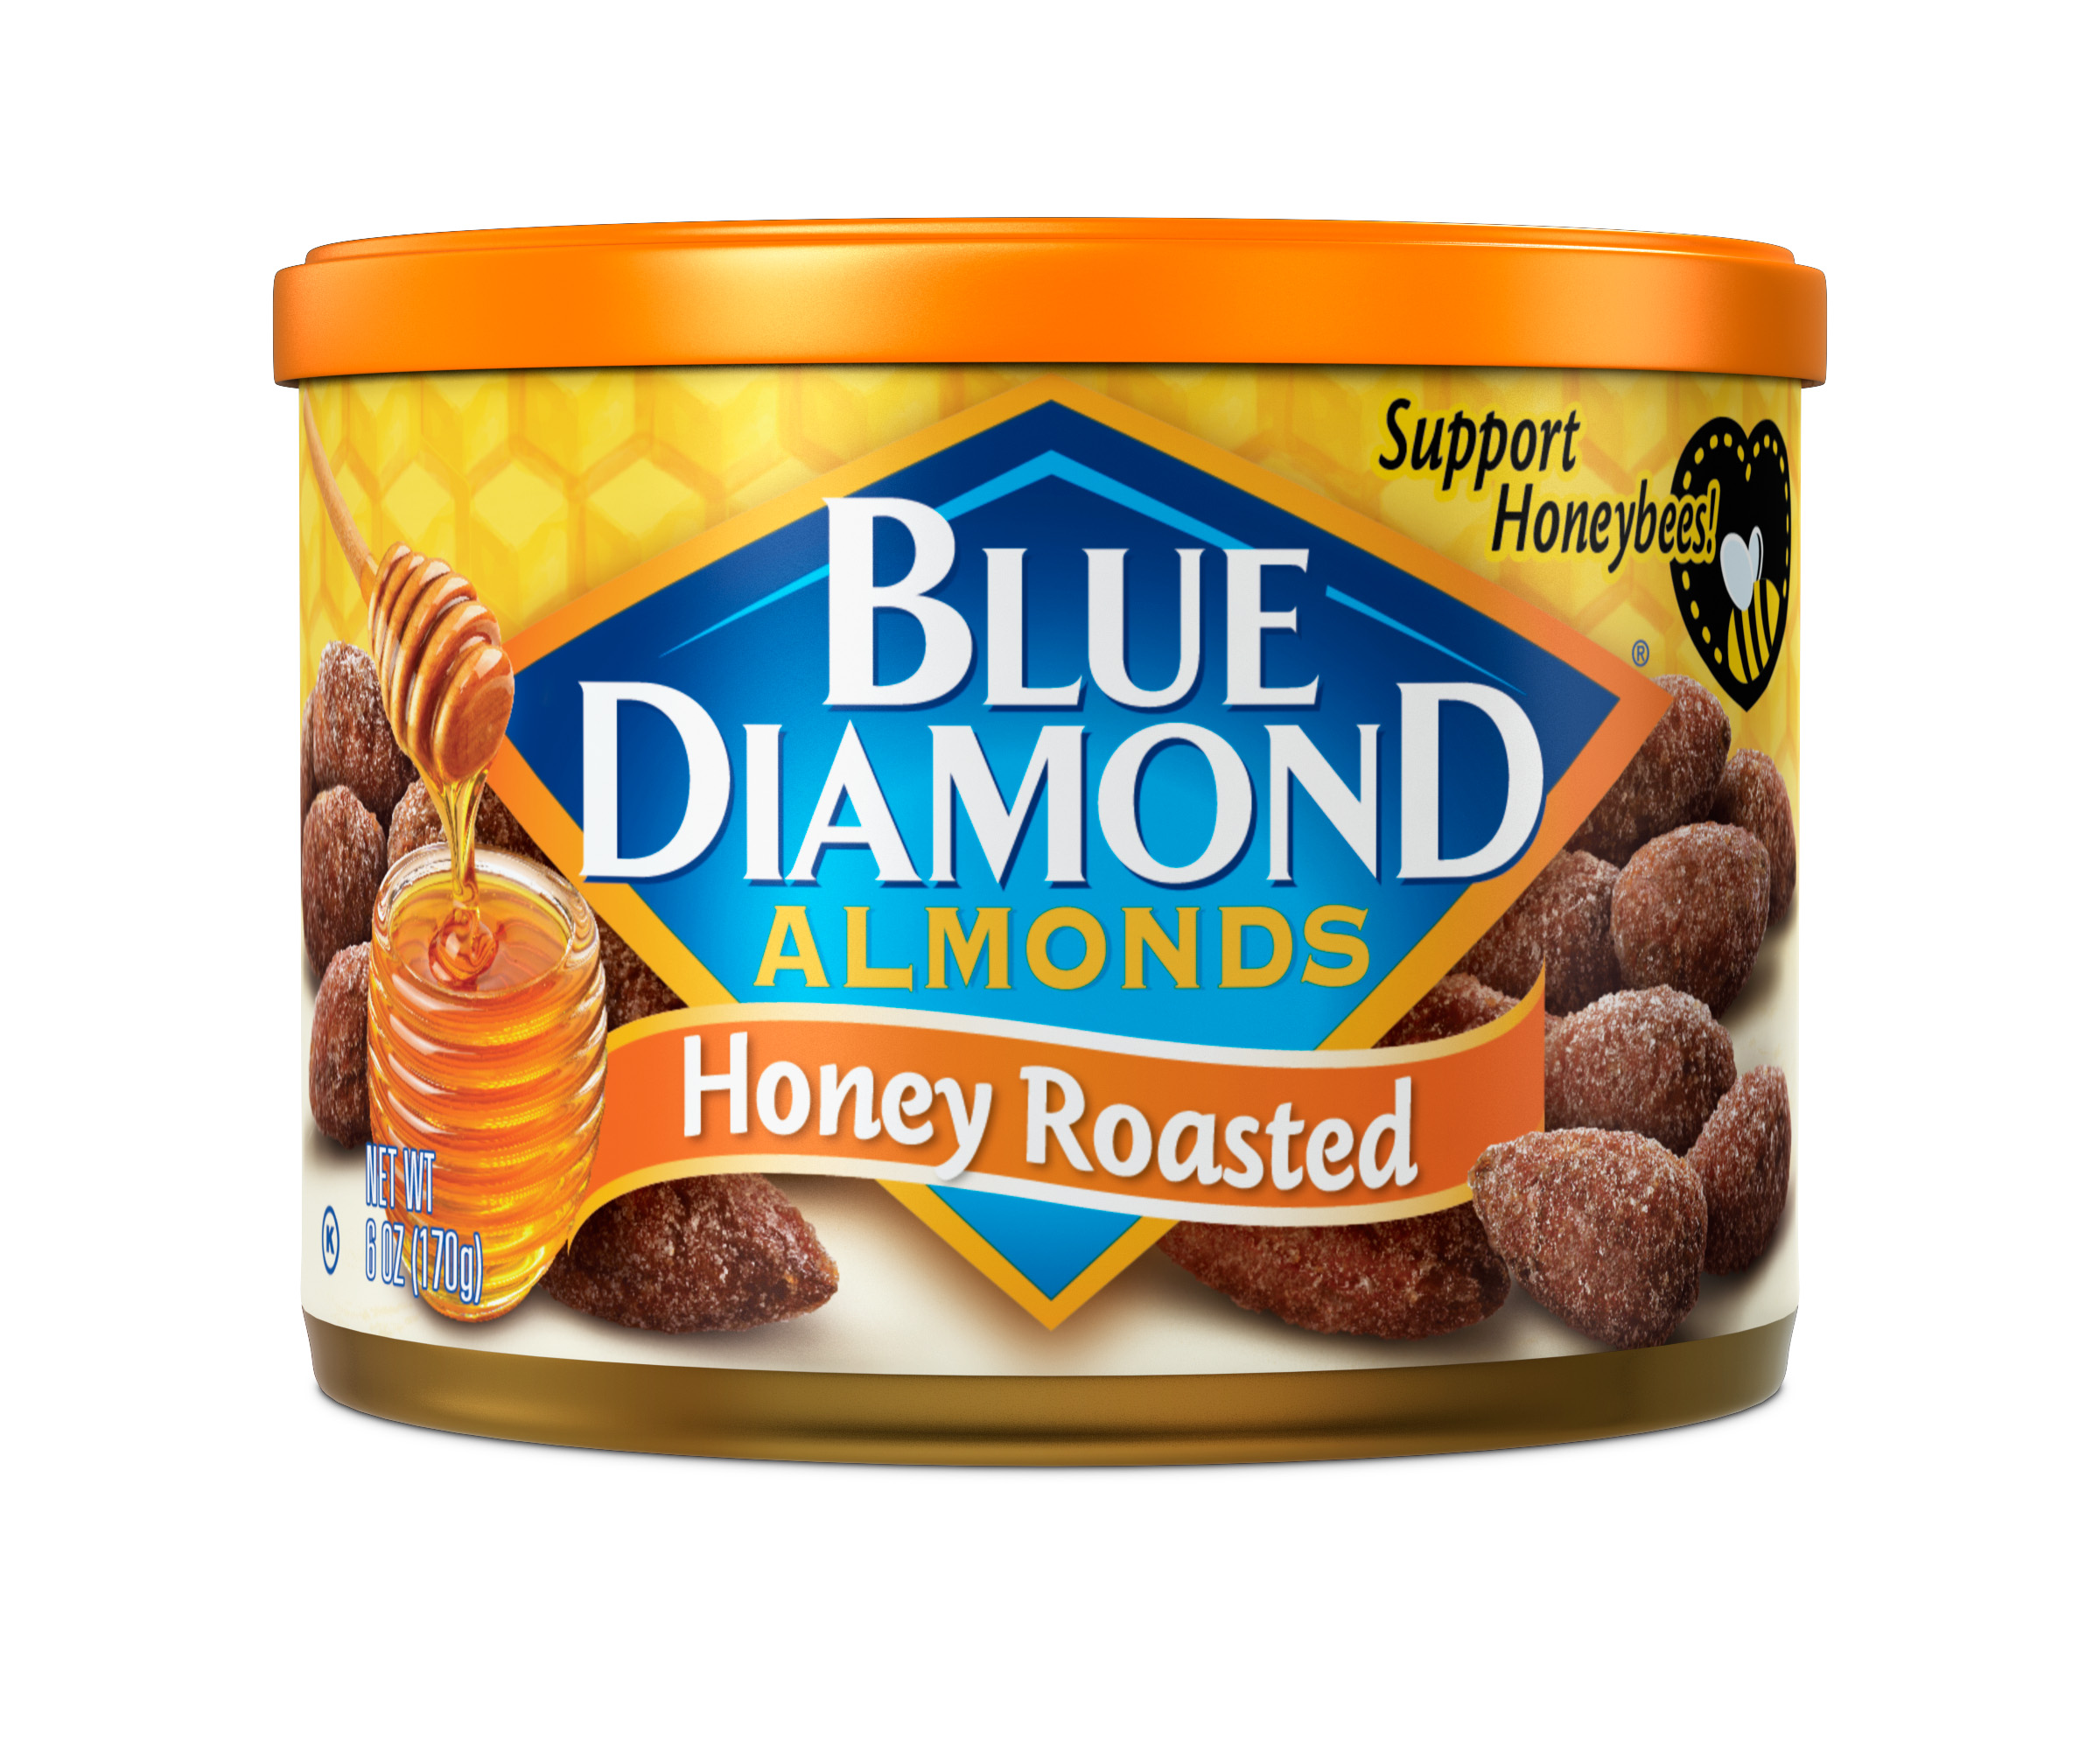 Blue Diamond Almonds Honey Roasted Flavored Snack Nuts perfect for snacking and on-the-go, 6 oz - image 3 of 7